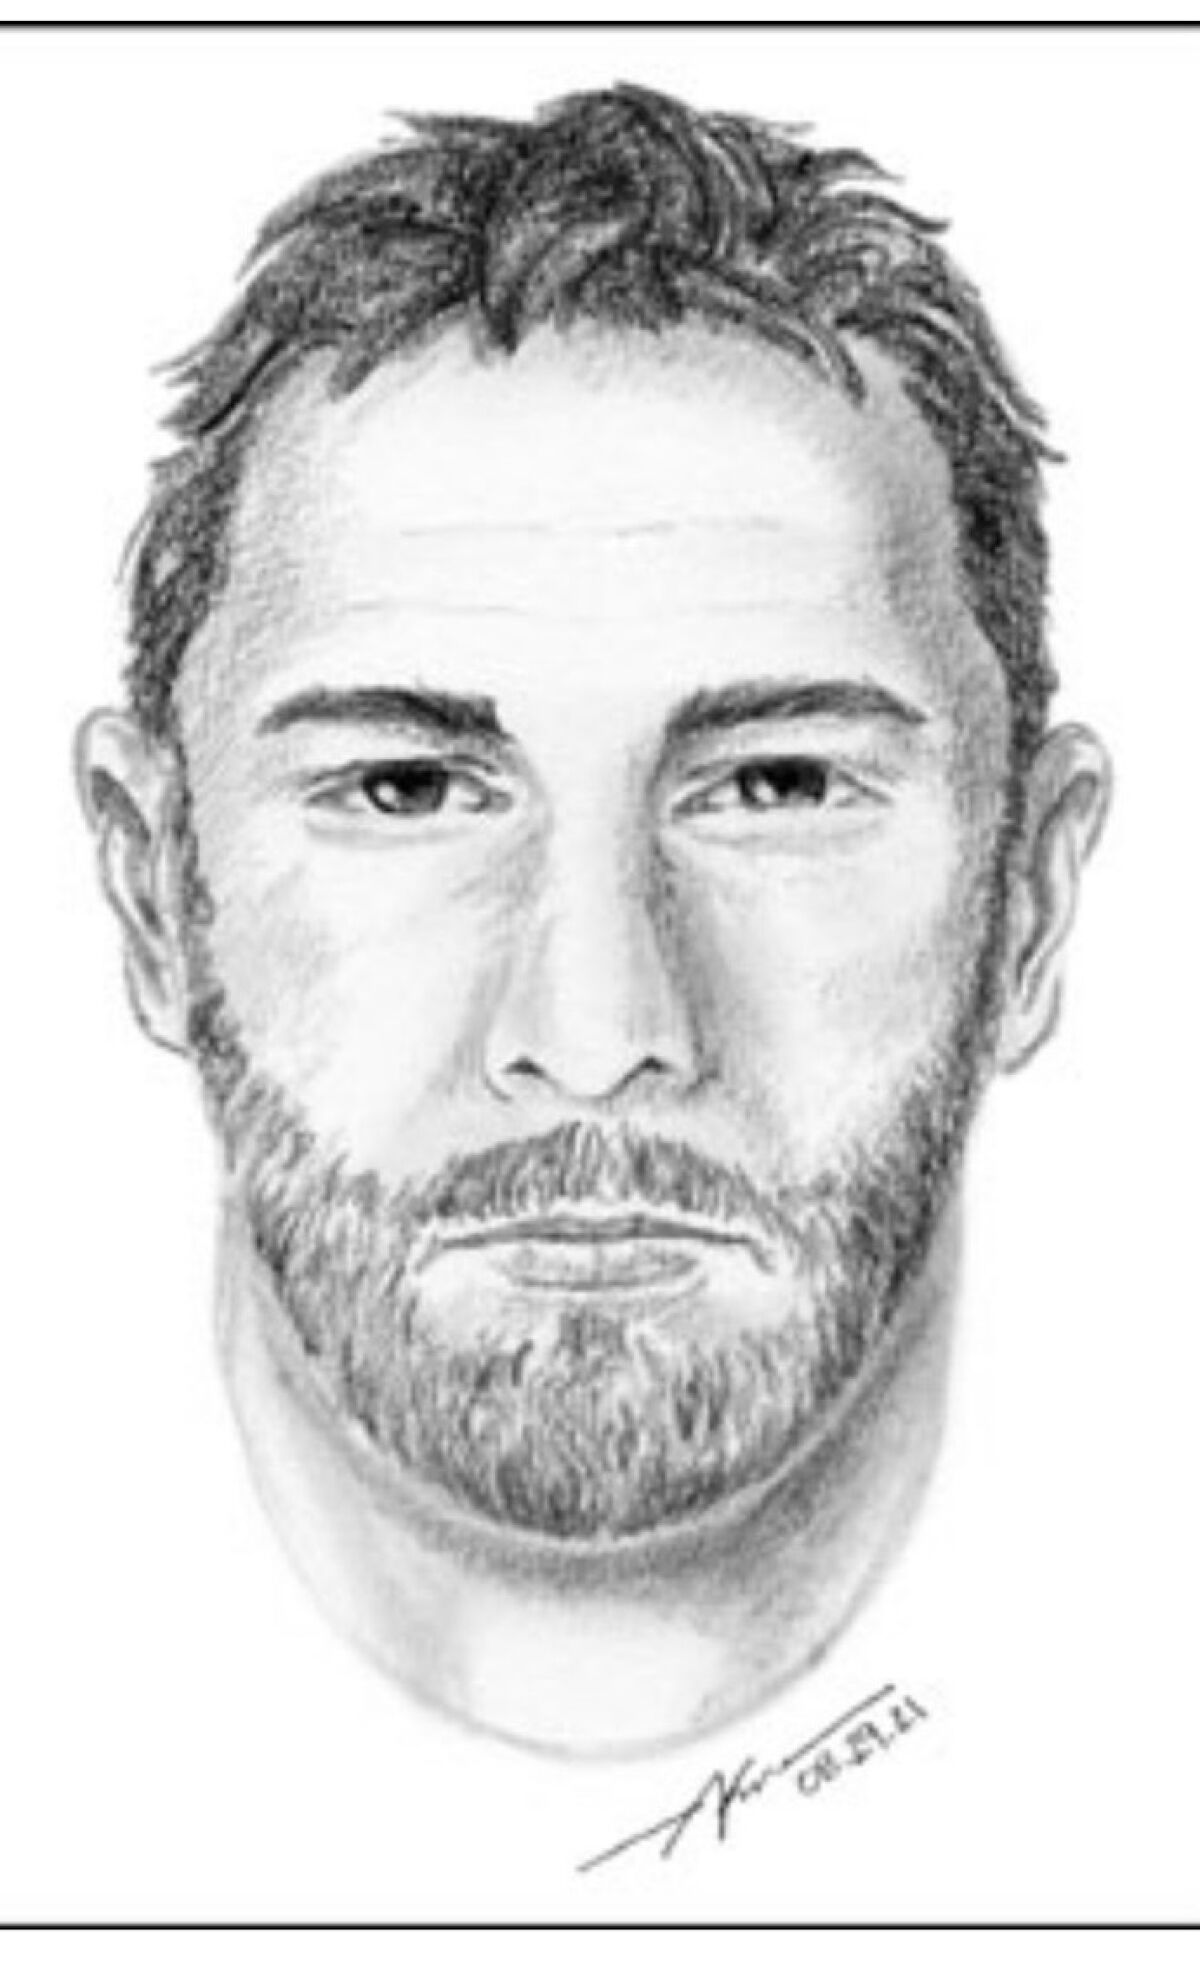 Sketch of suspect with short hair, beard and mustache